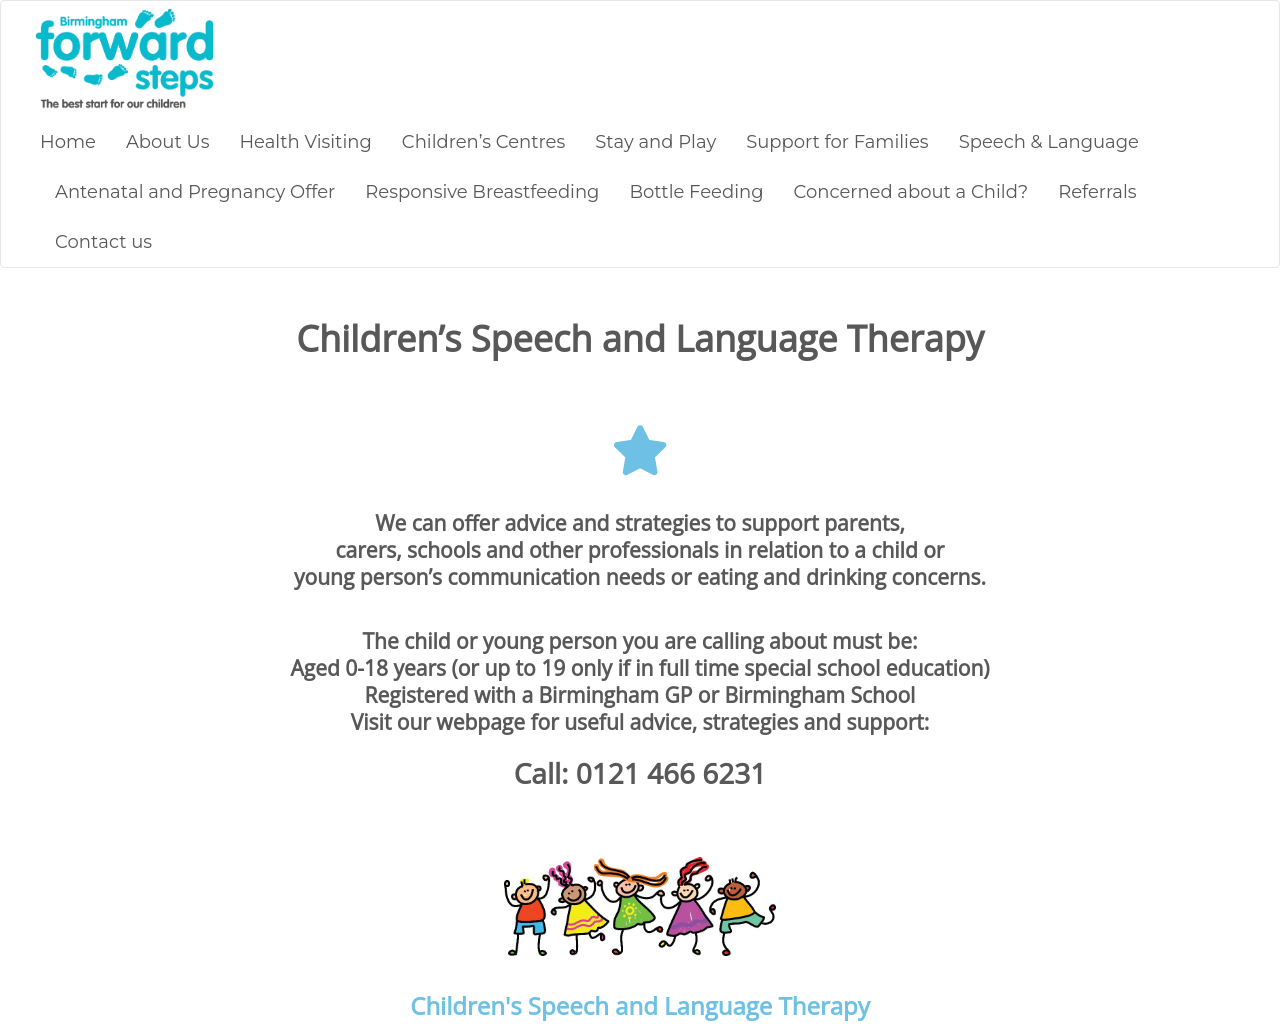 Children's Speech and Language Therapy